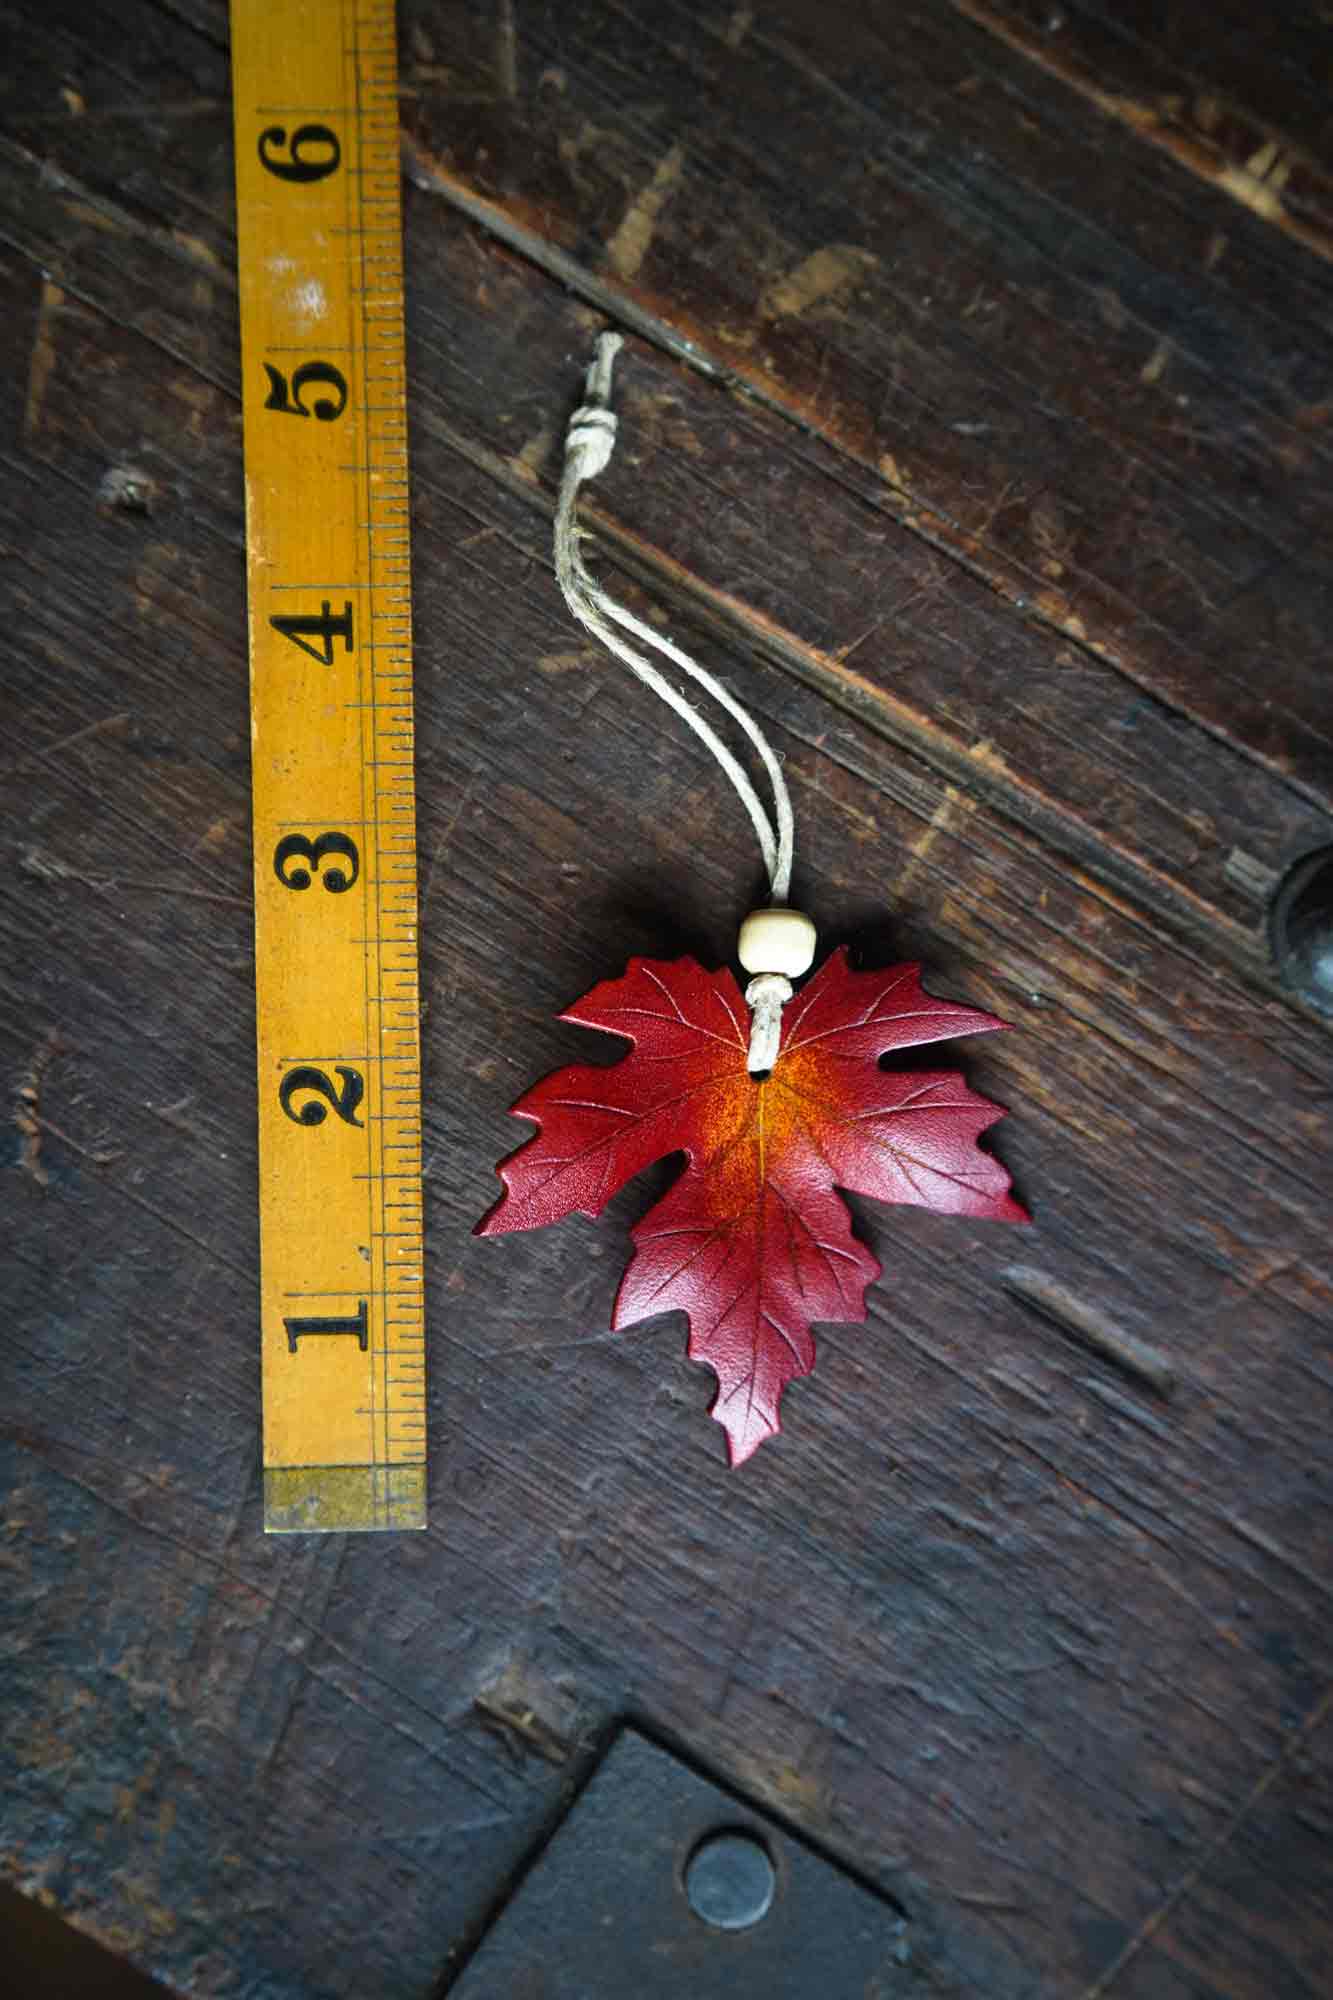 Maple Leaf Leather Ornament